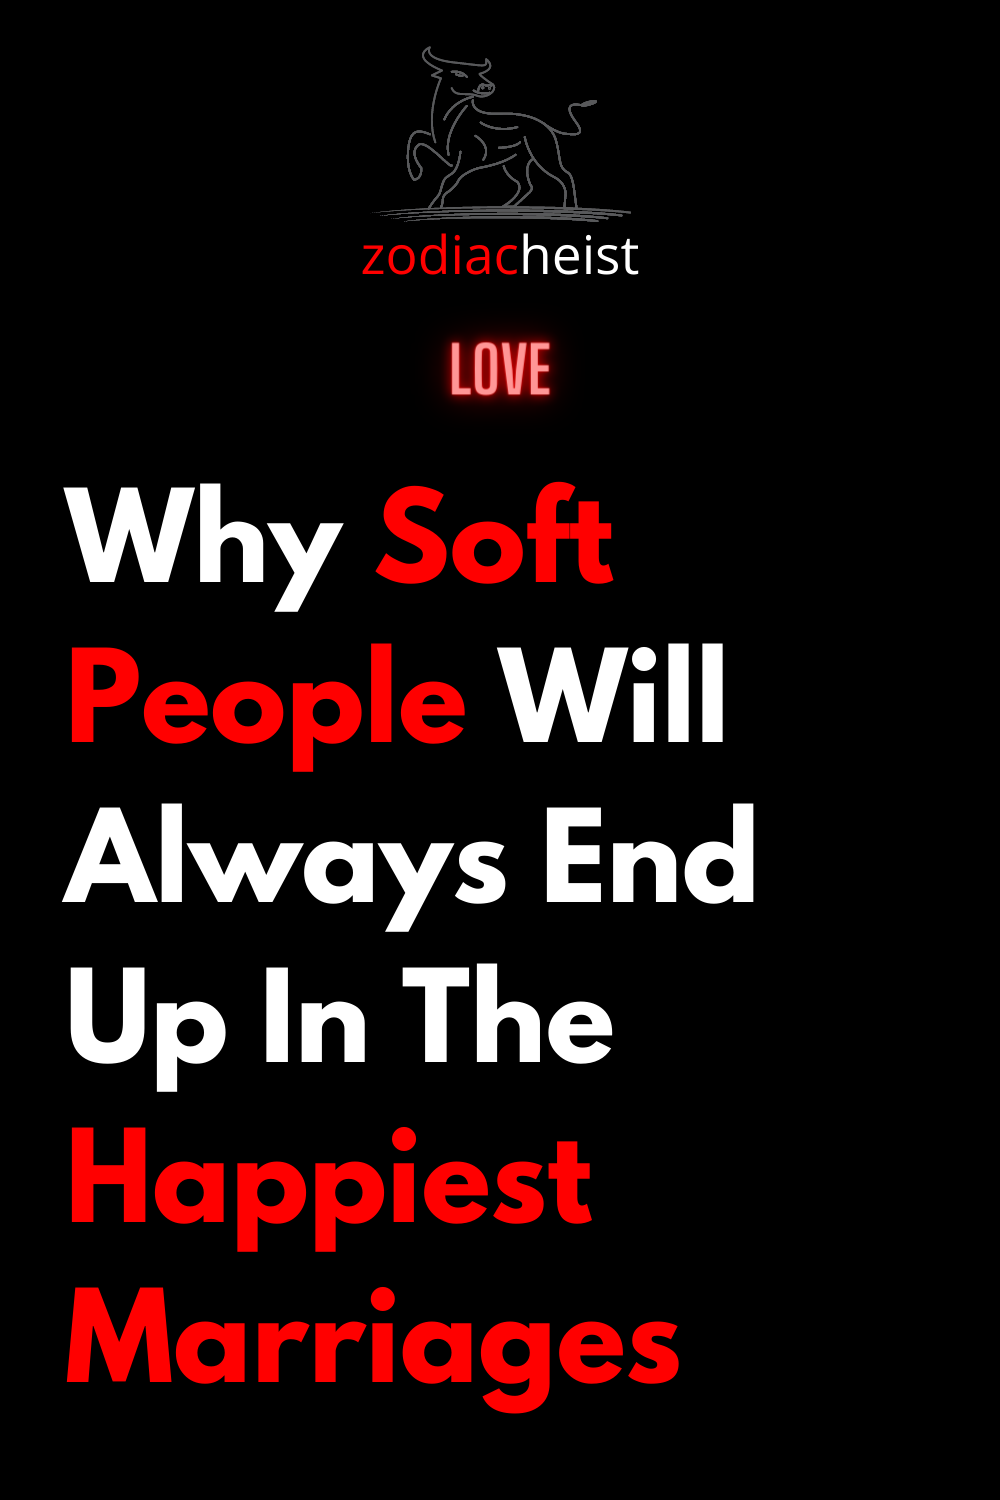 Why Soft People Will Always End Up In The Happiest Marriages